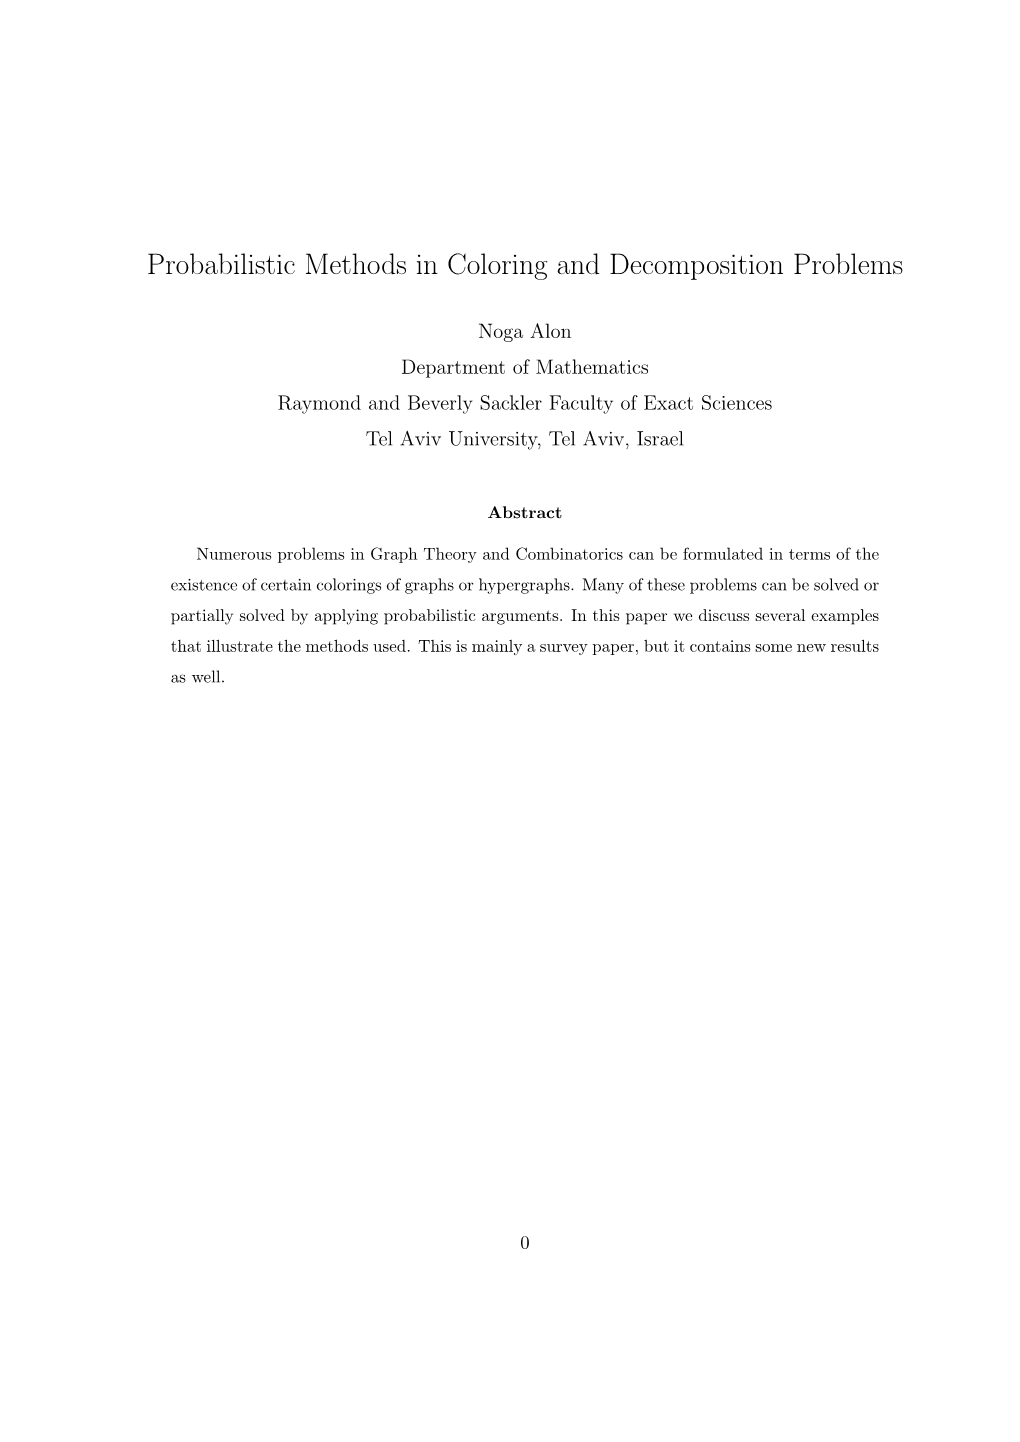 Probabilistic Methods in Coloring and Decomposition Problems